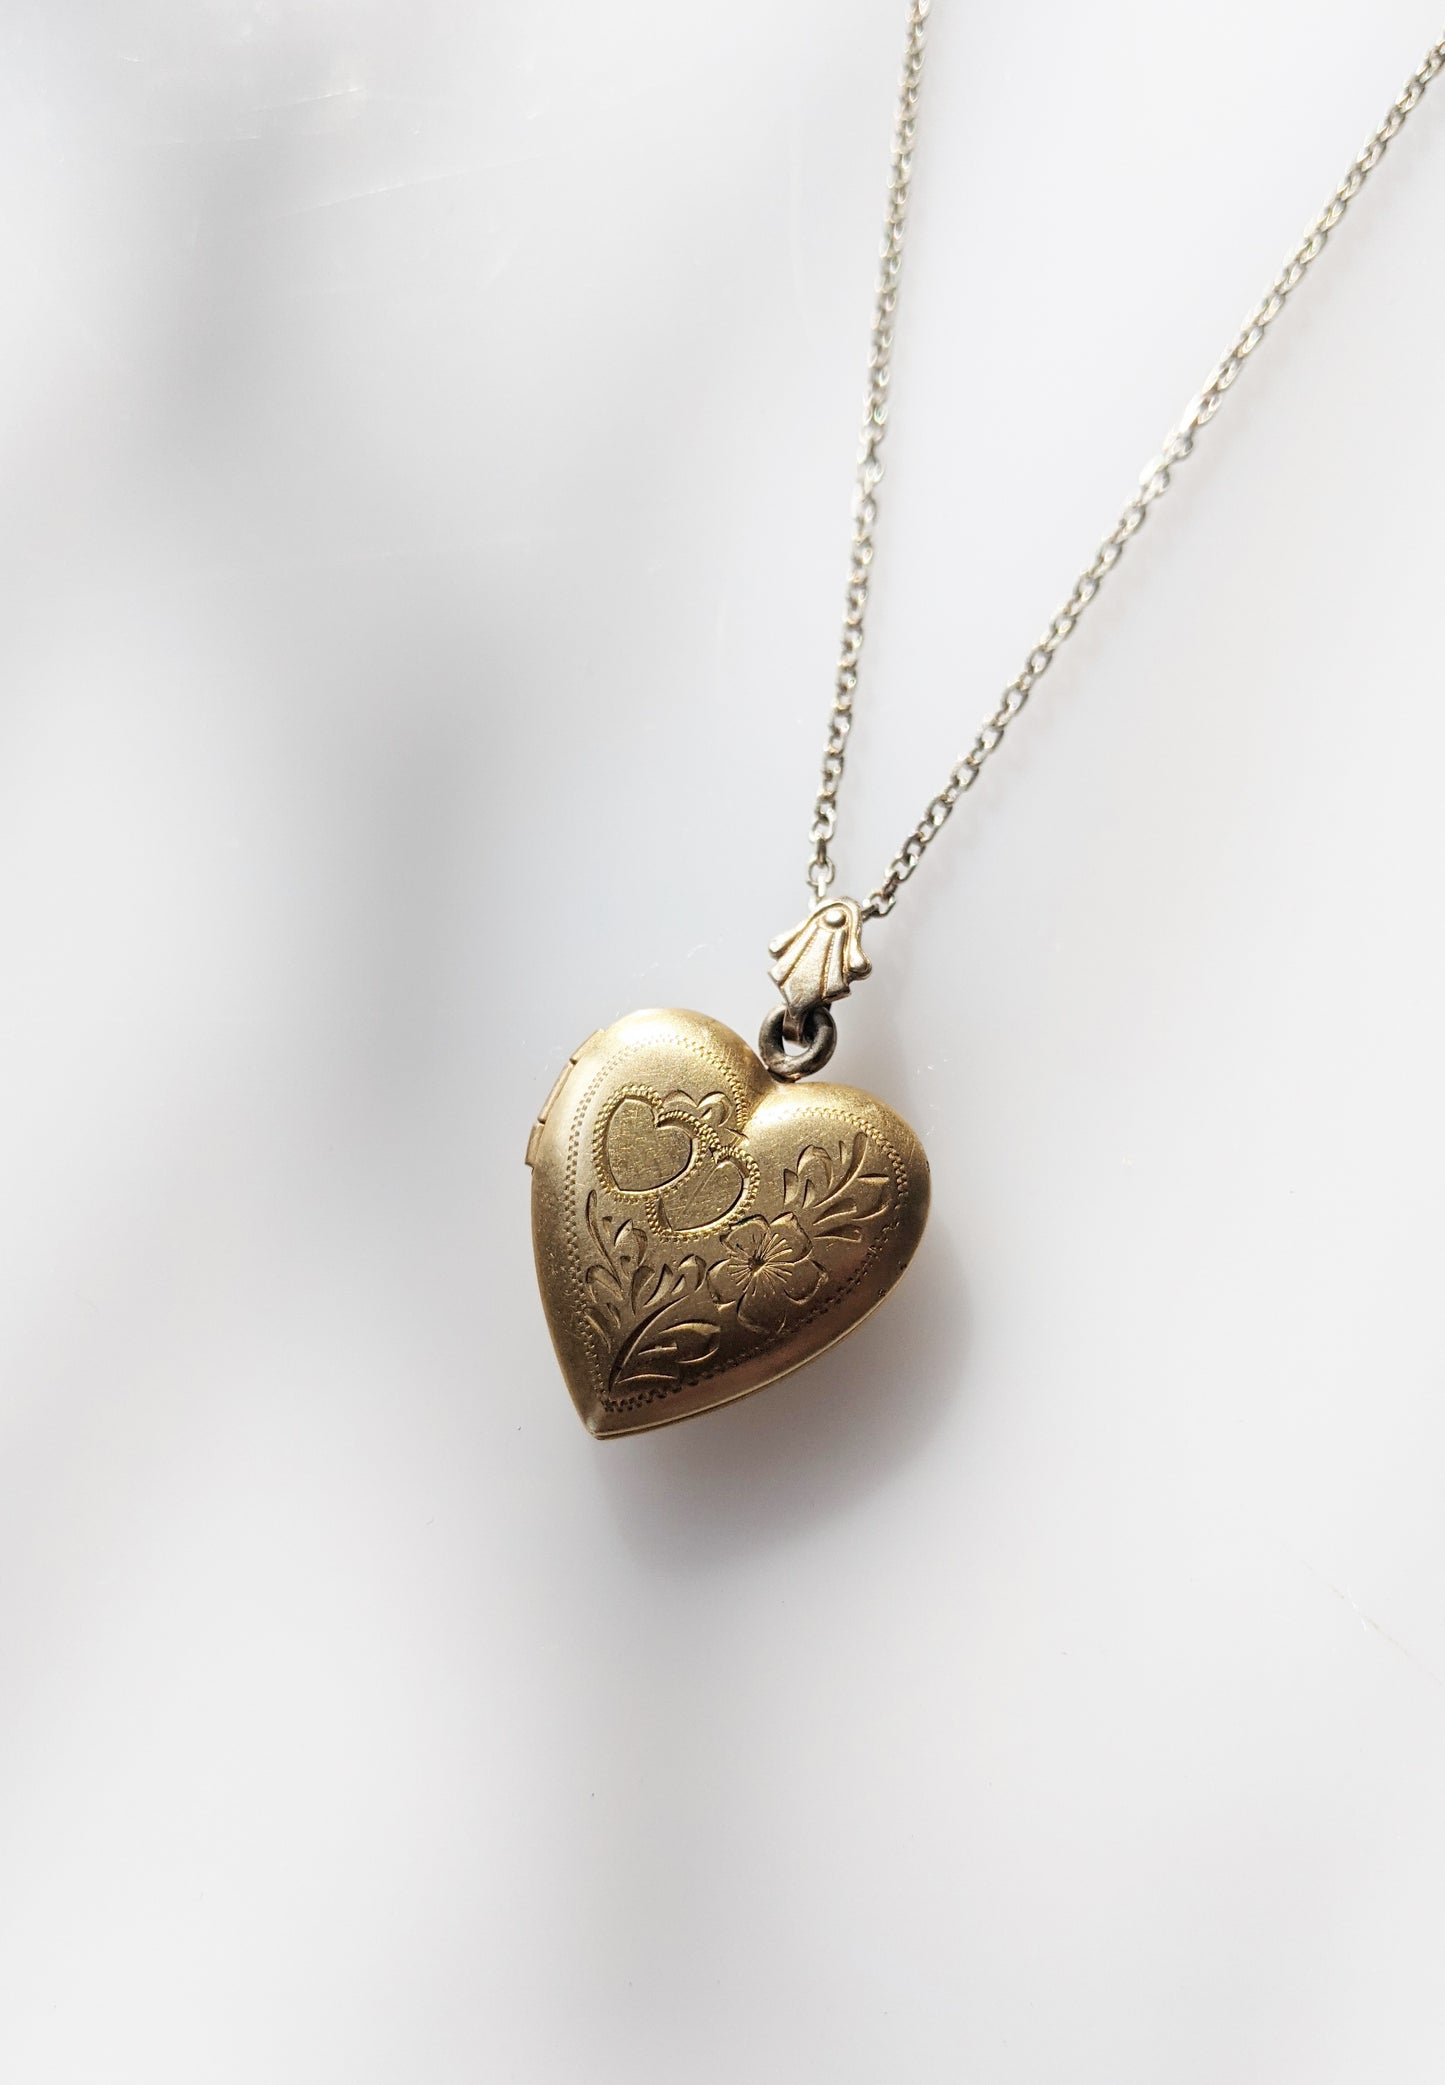 Vintage Gold Heart-Shaped Locket | Double Heart and Flower Motif